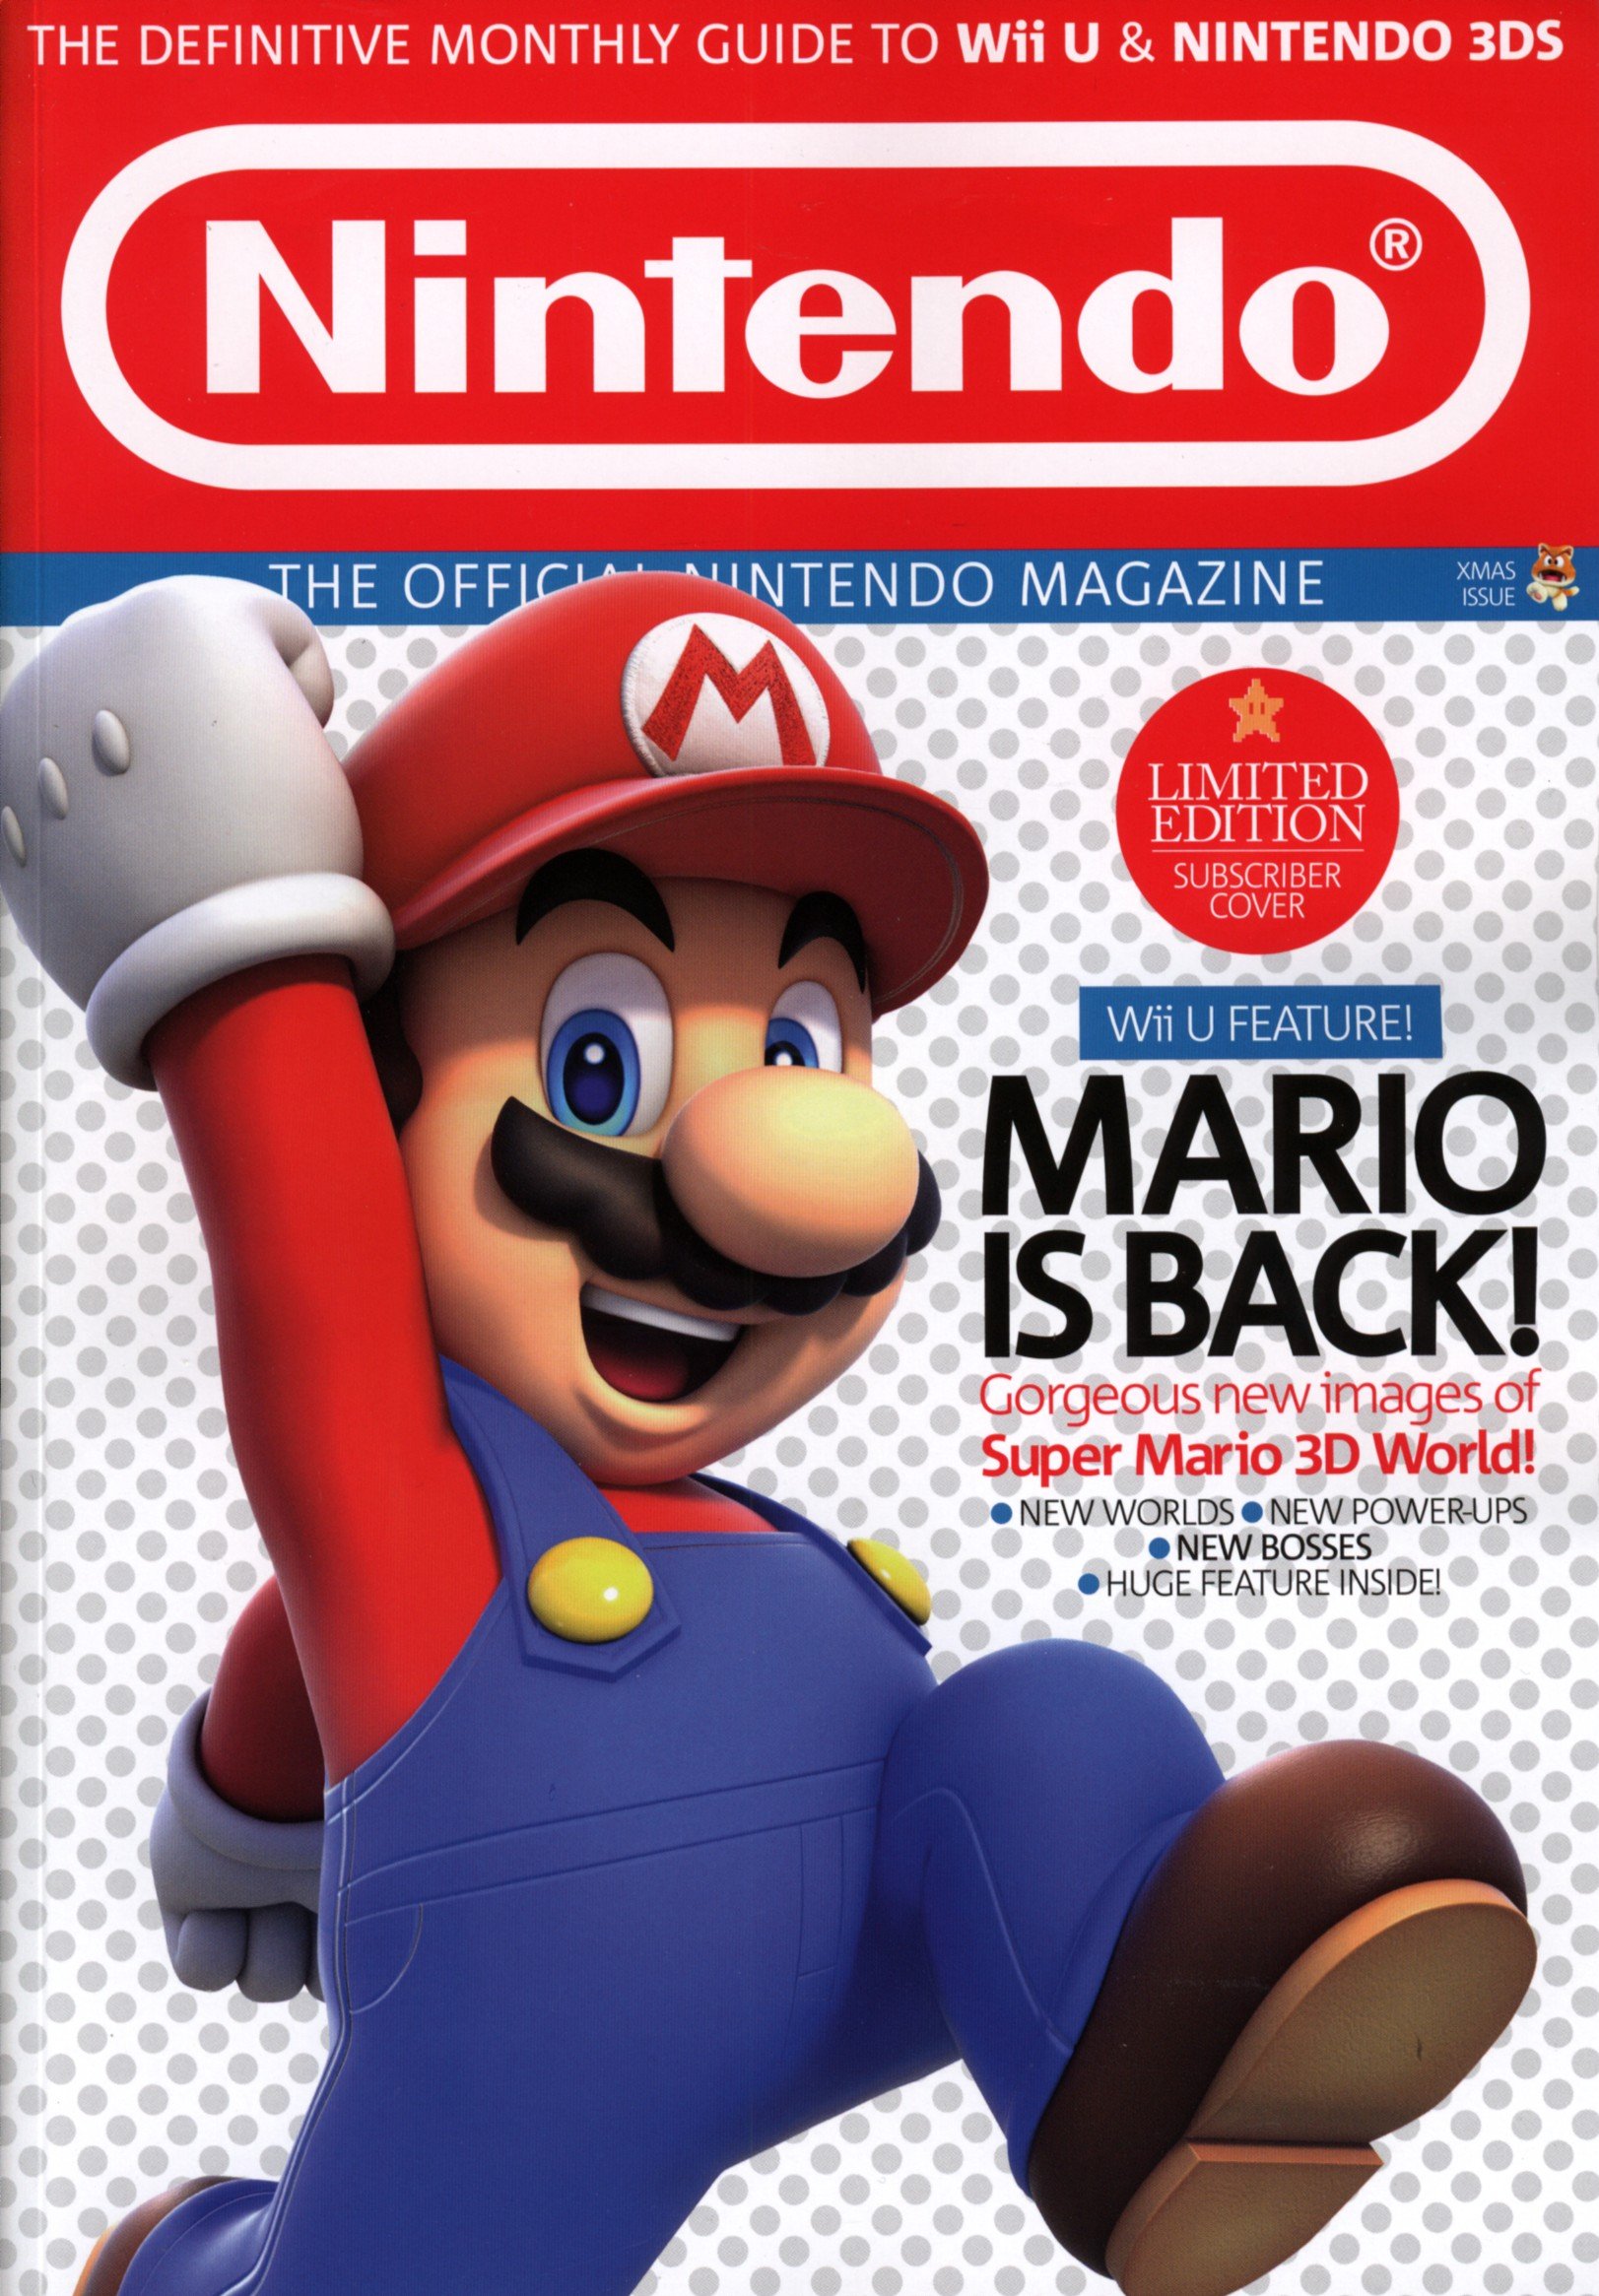 Image Official Nintendo Magazine Issue 101.jpg Magazines from the